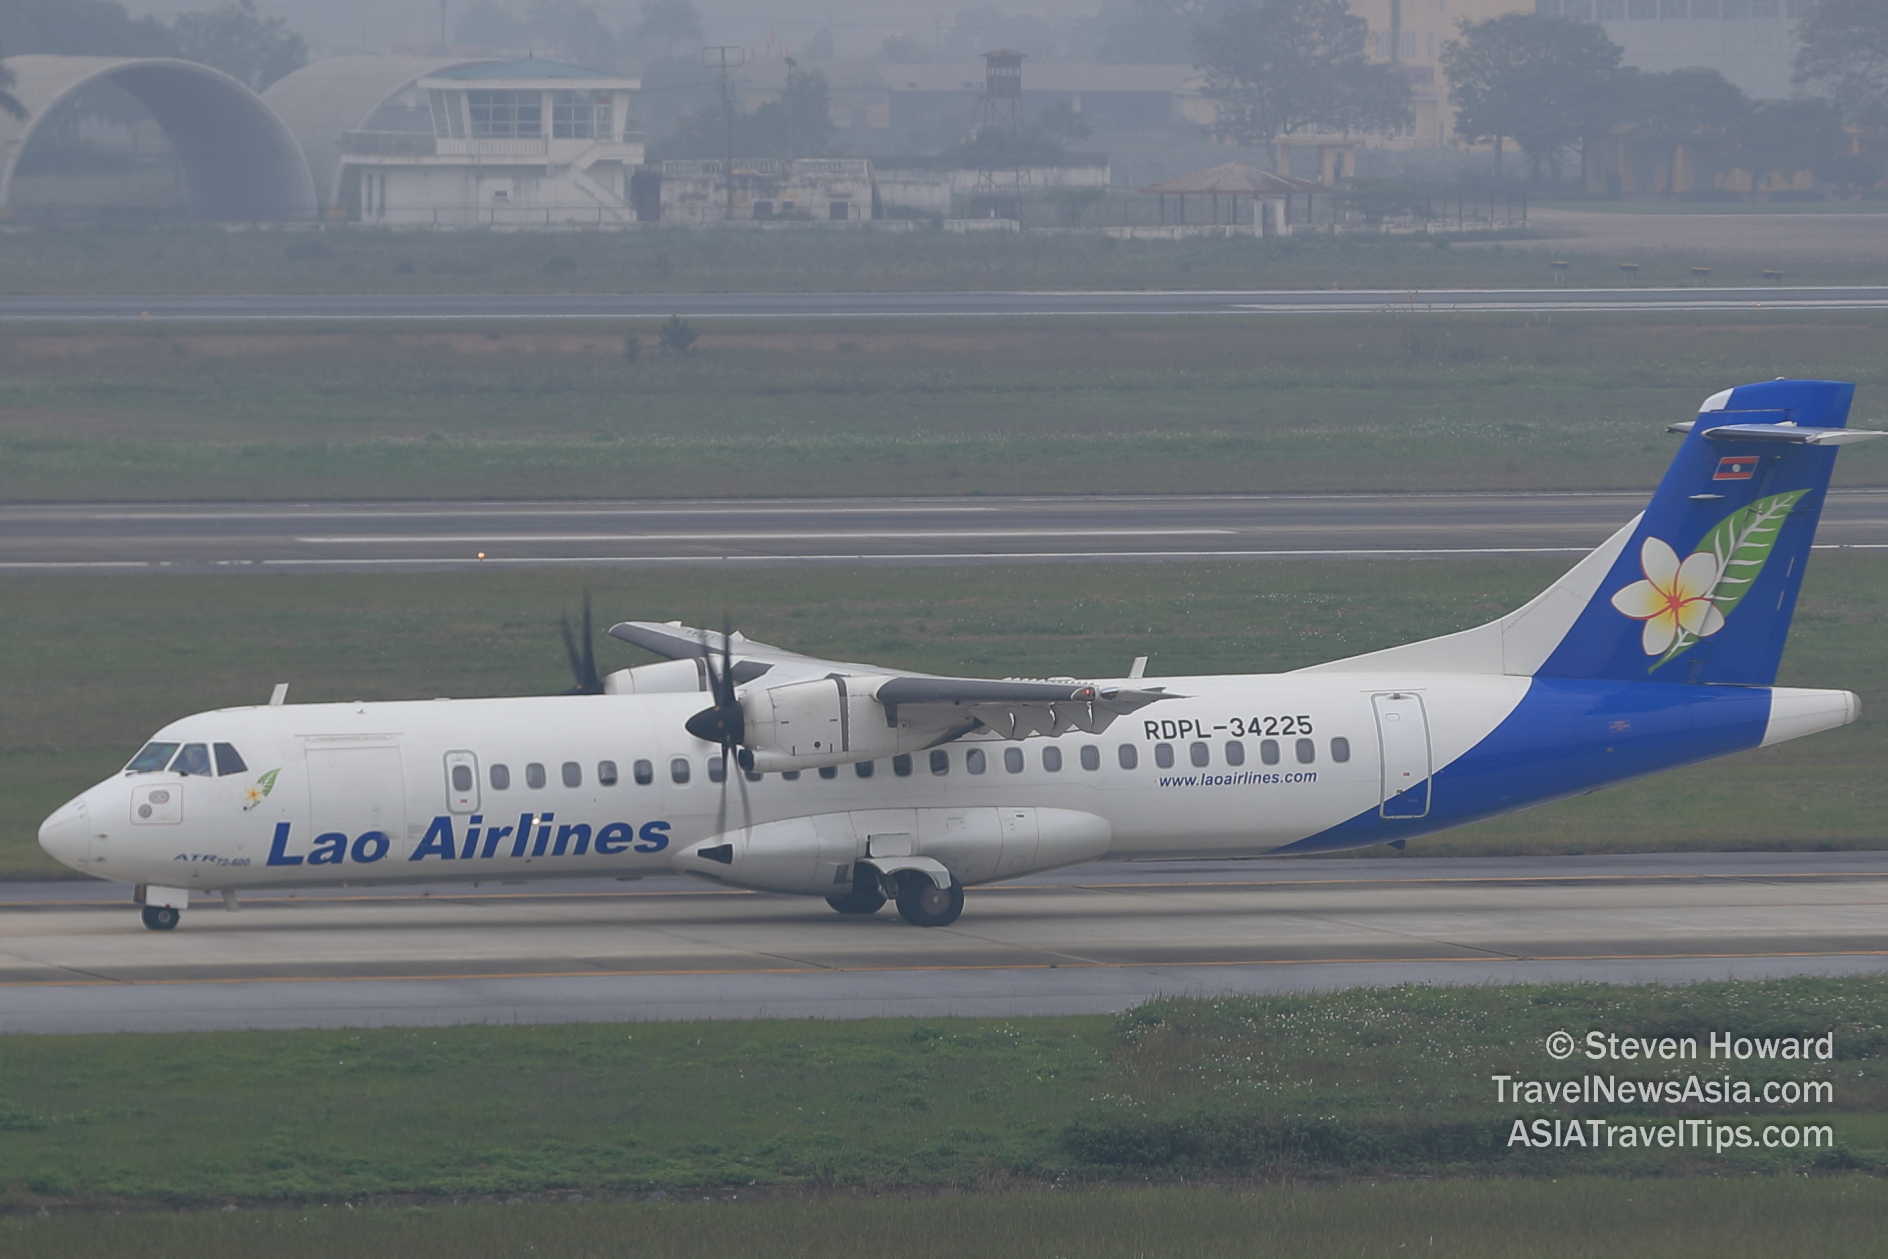 Lao Airlines ATR 72-600 reg: RDPL-34225 on a foggy day at HAN. Picture by Steven Howard of TravelNewsAsia.com Click to enlarge.